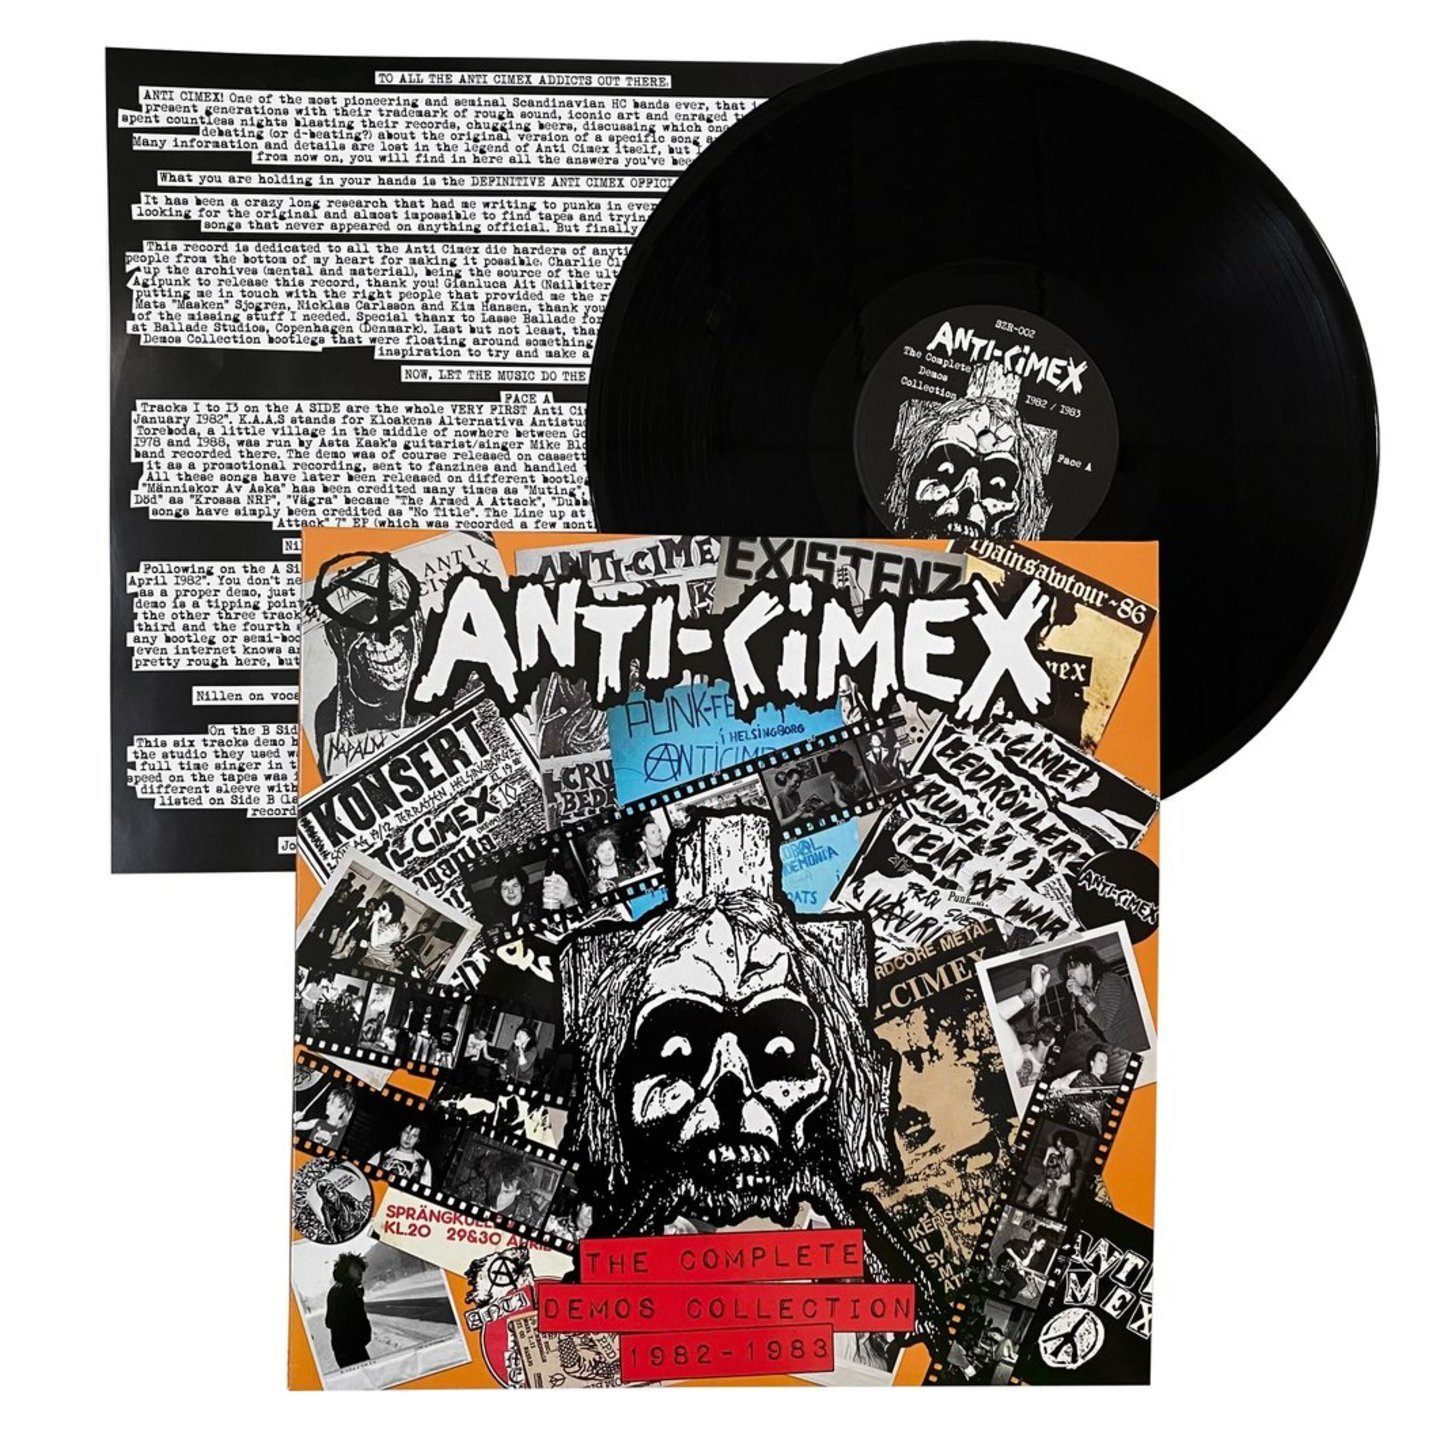 ANTI CIMEX - The Complete Demos Collection 82-83 12